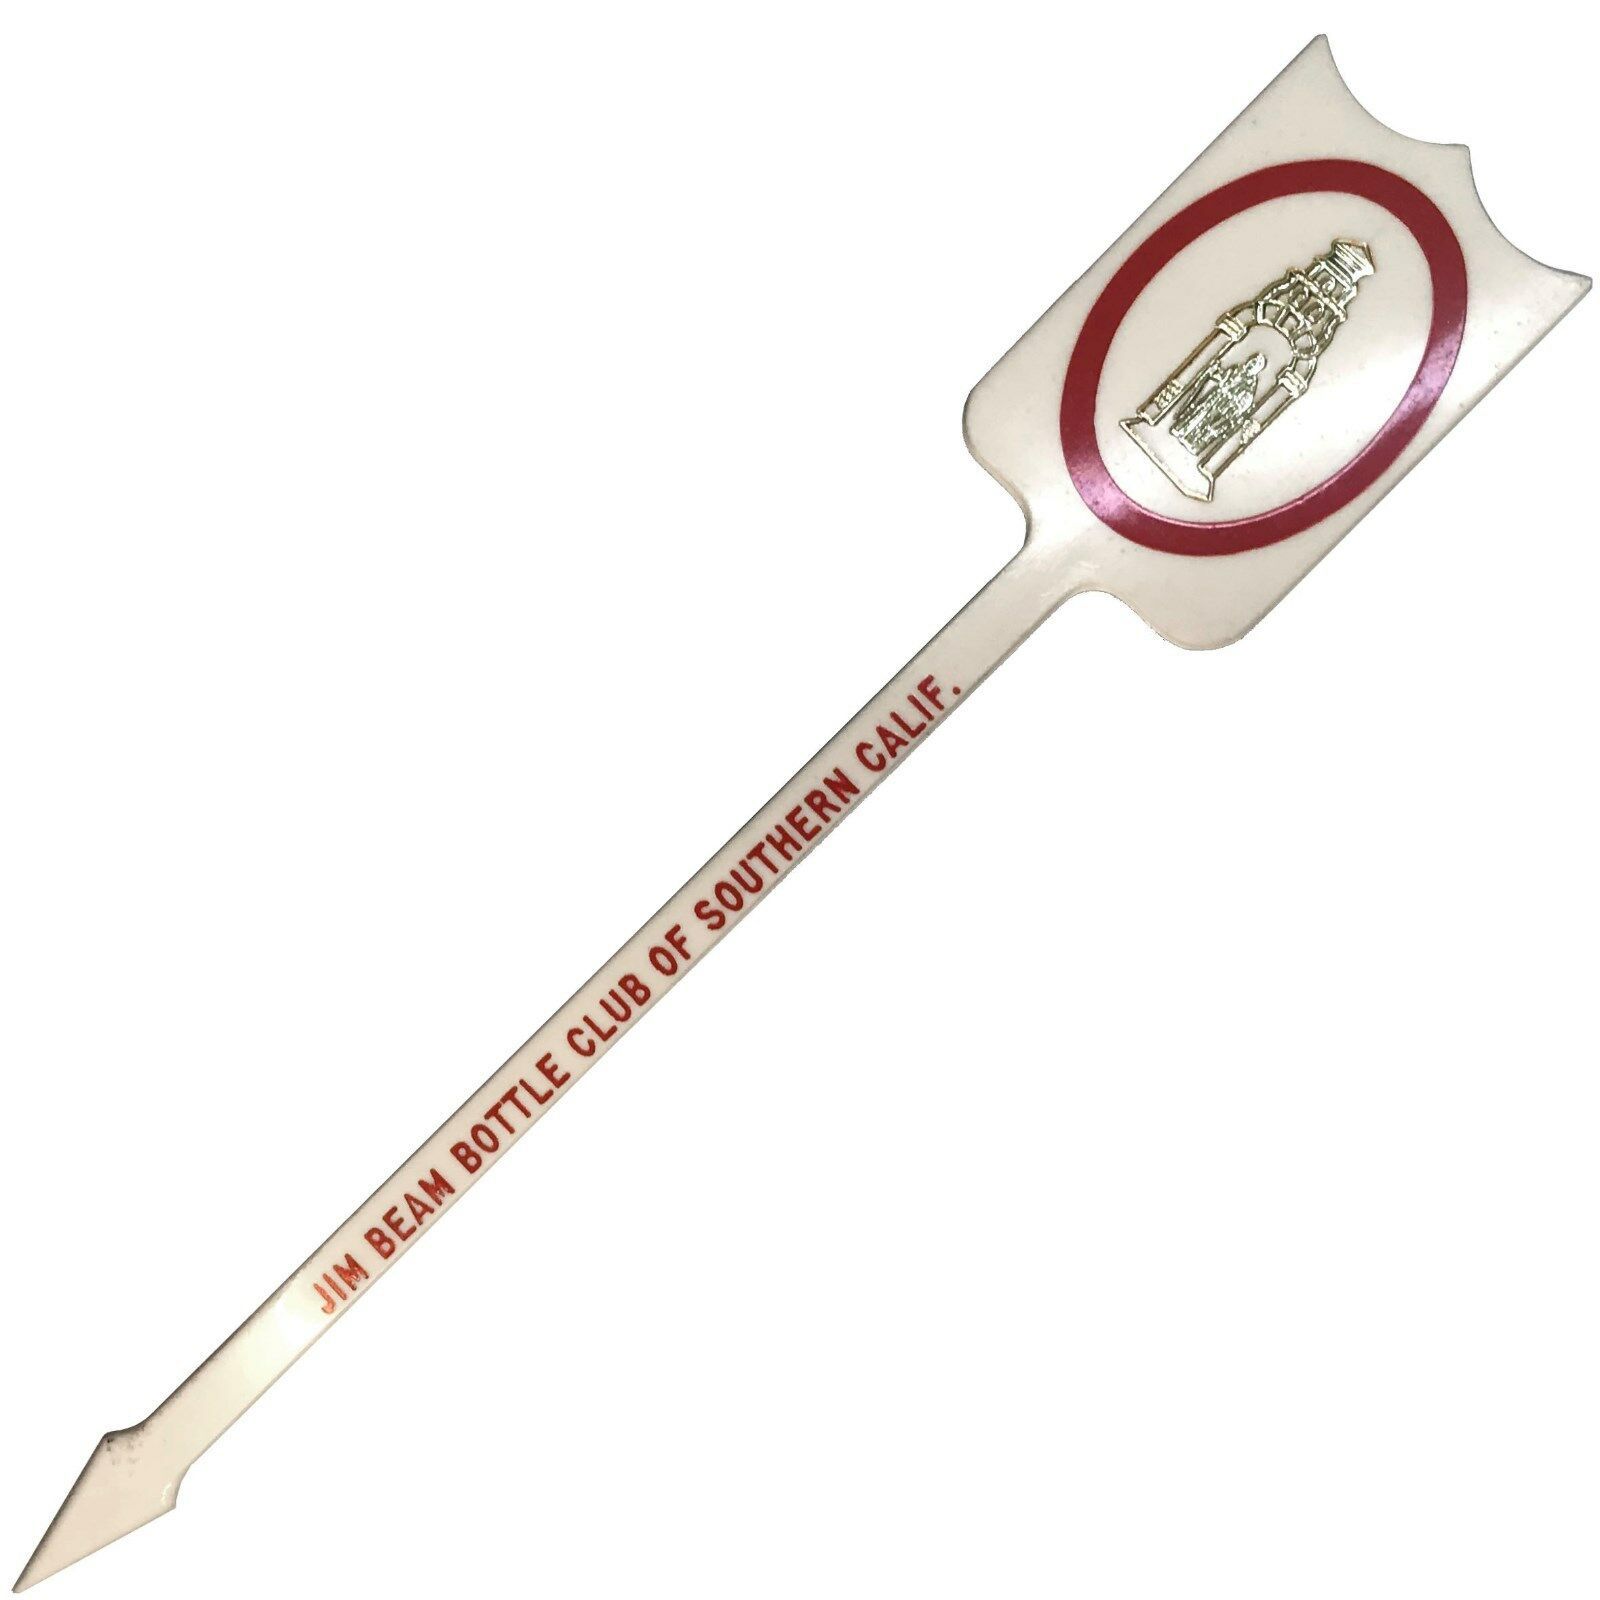 Primary image for Jim Beam Bottle Club of Southern California, vintage SWIZZLE STICK stirrer